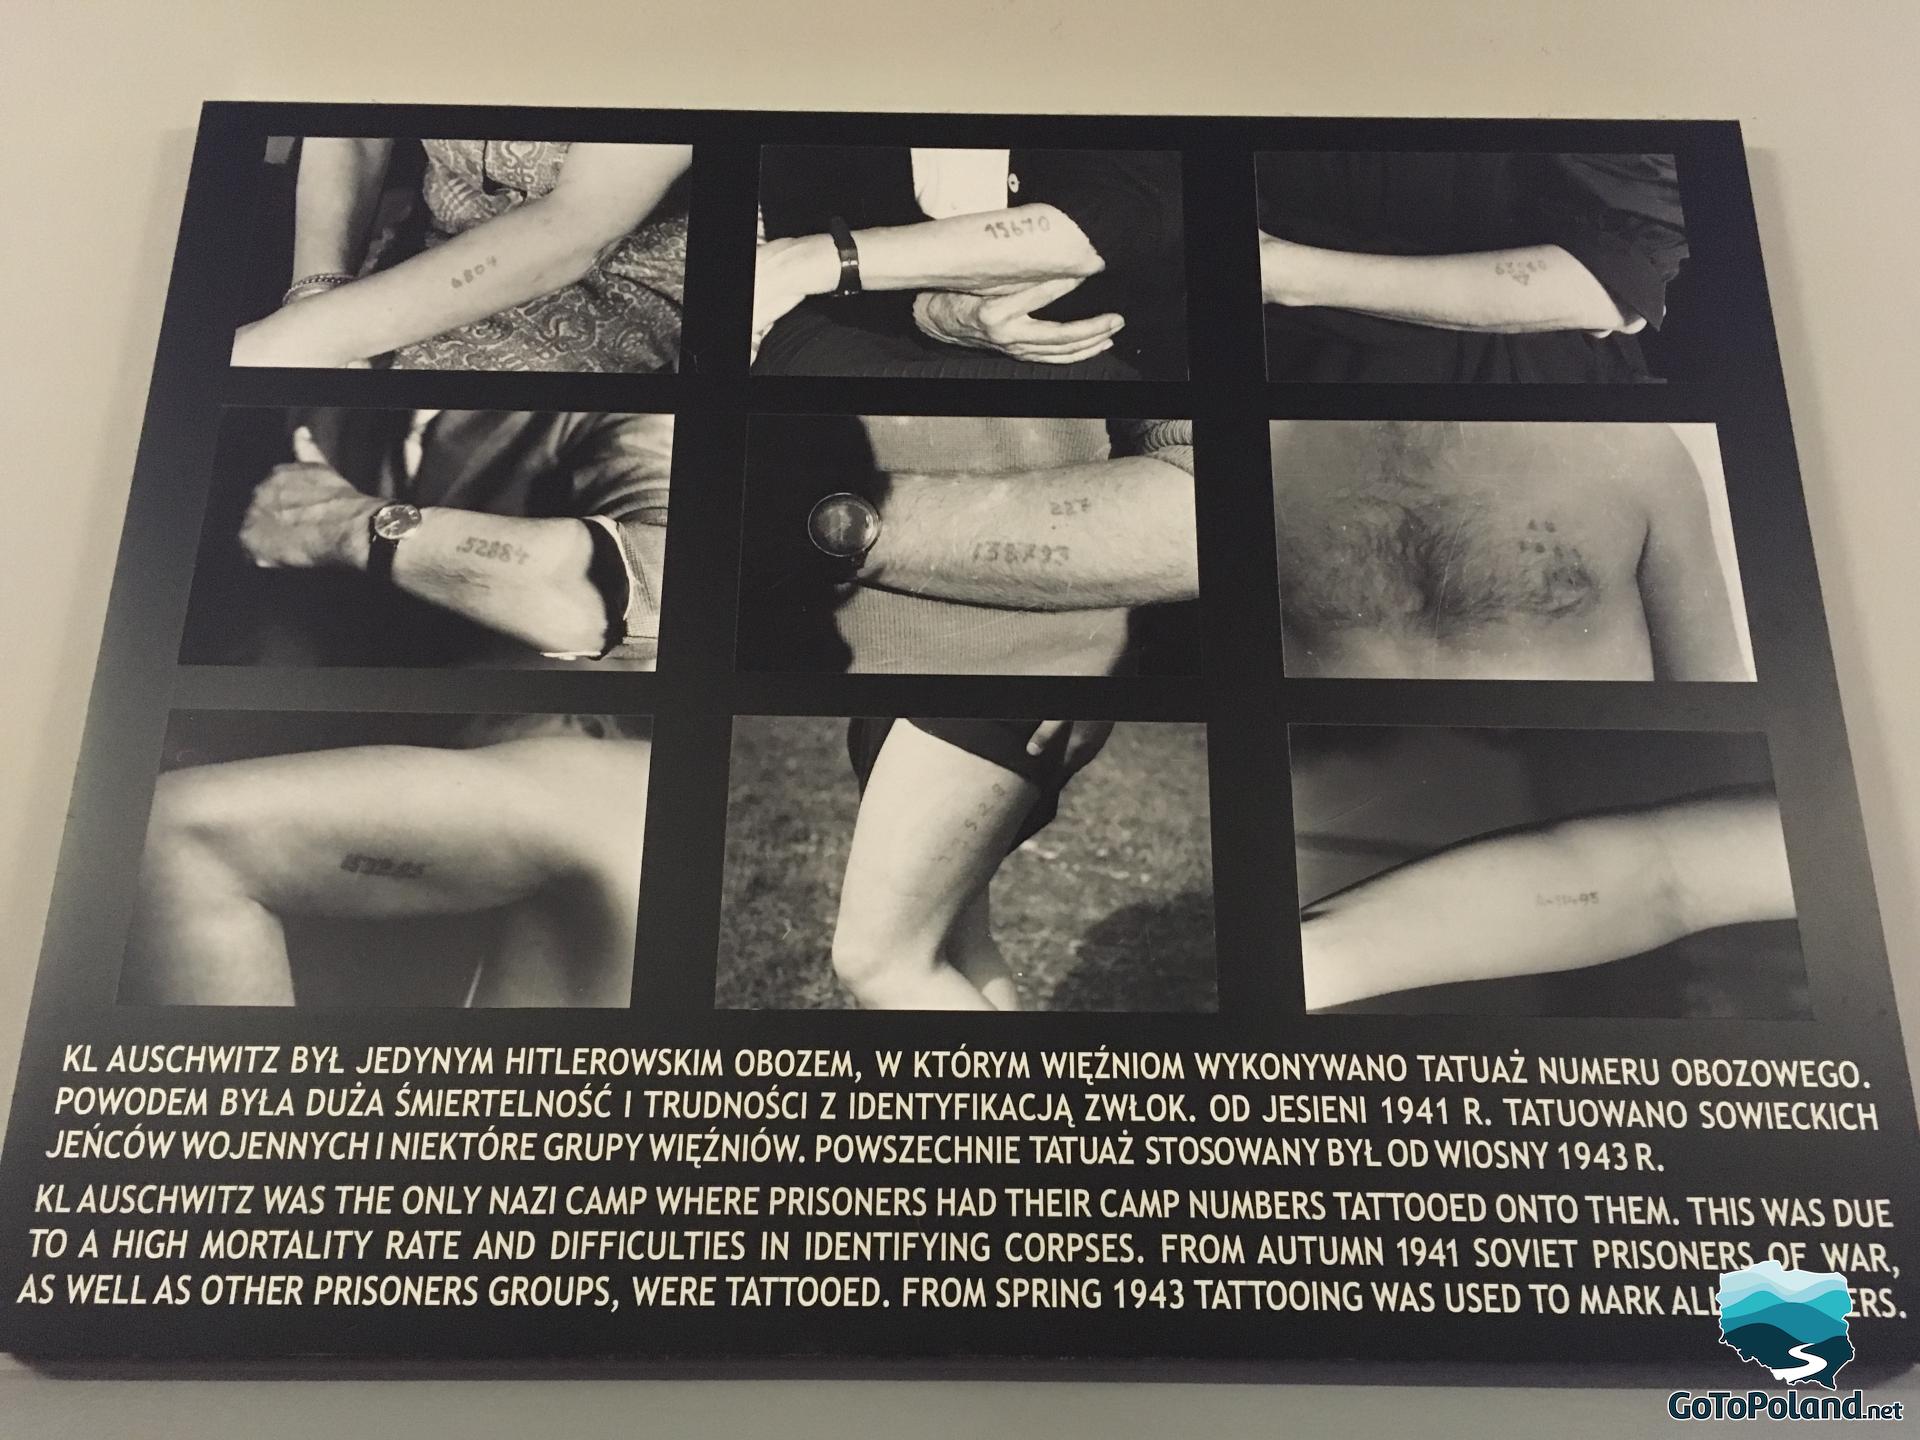 information board with photos of tattooed various body parts